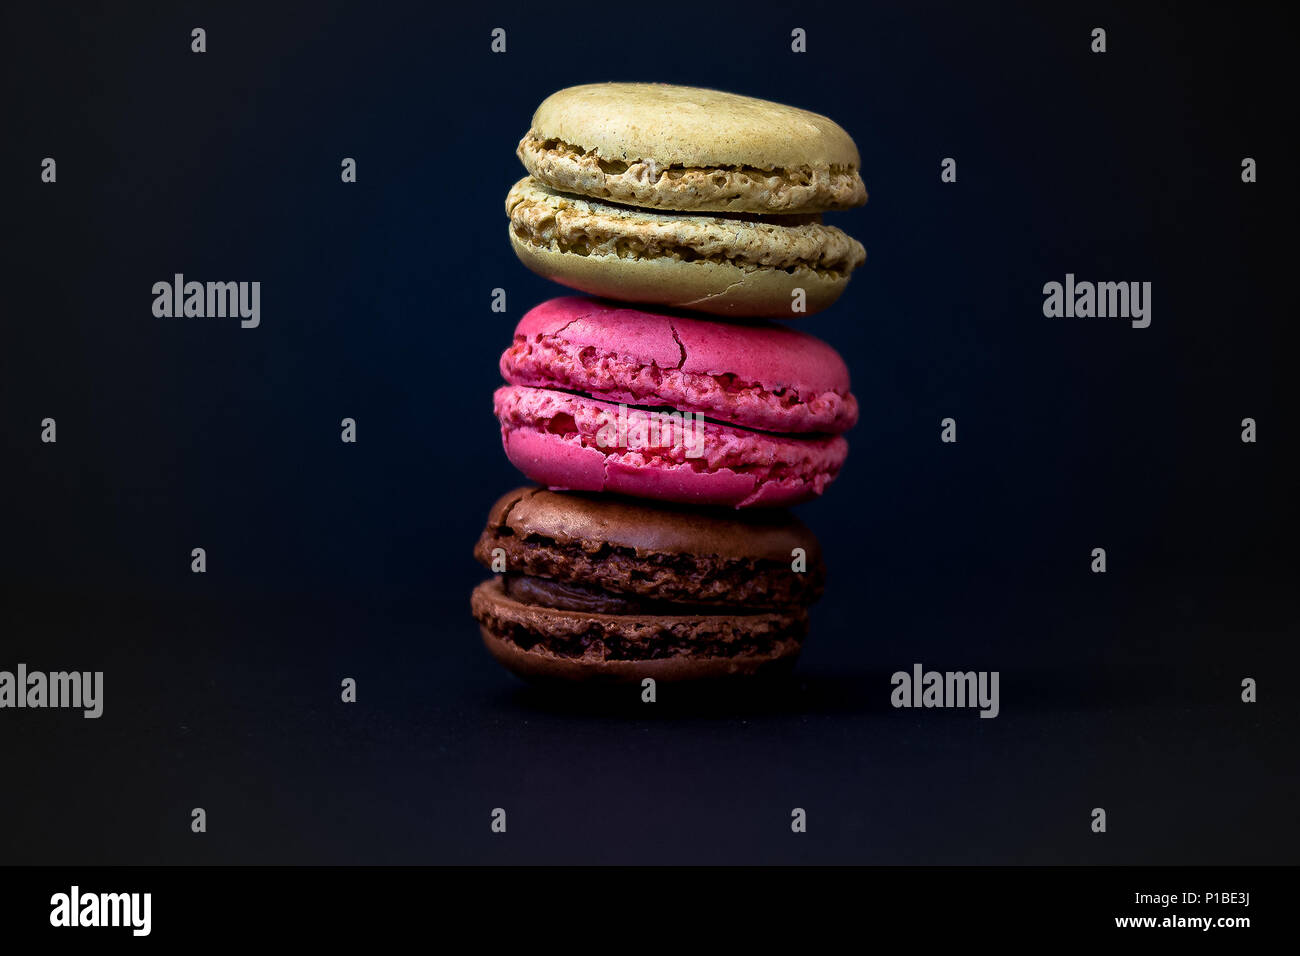 A stack of 3 Macarons, shot against a dark background Stock Photo